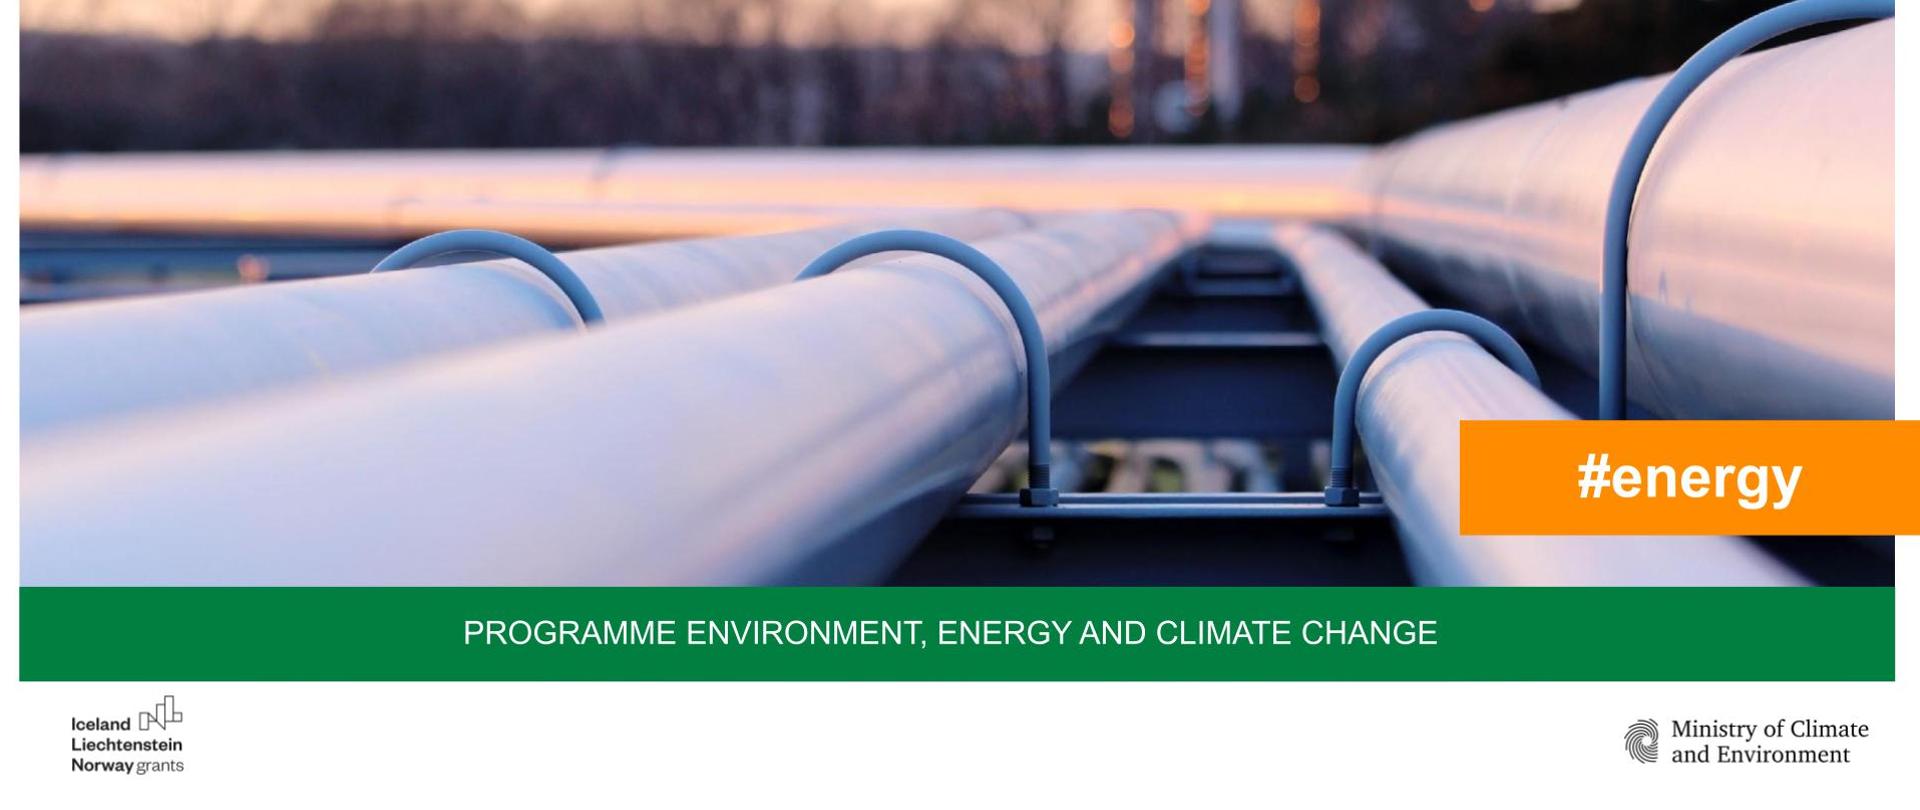 Environment Energy and Climate Change Programme - #energy hating systems